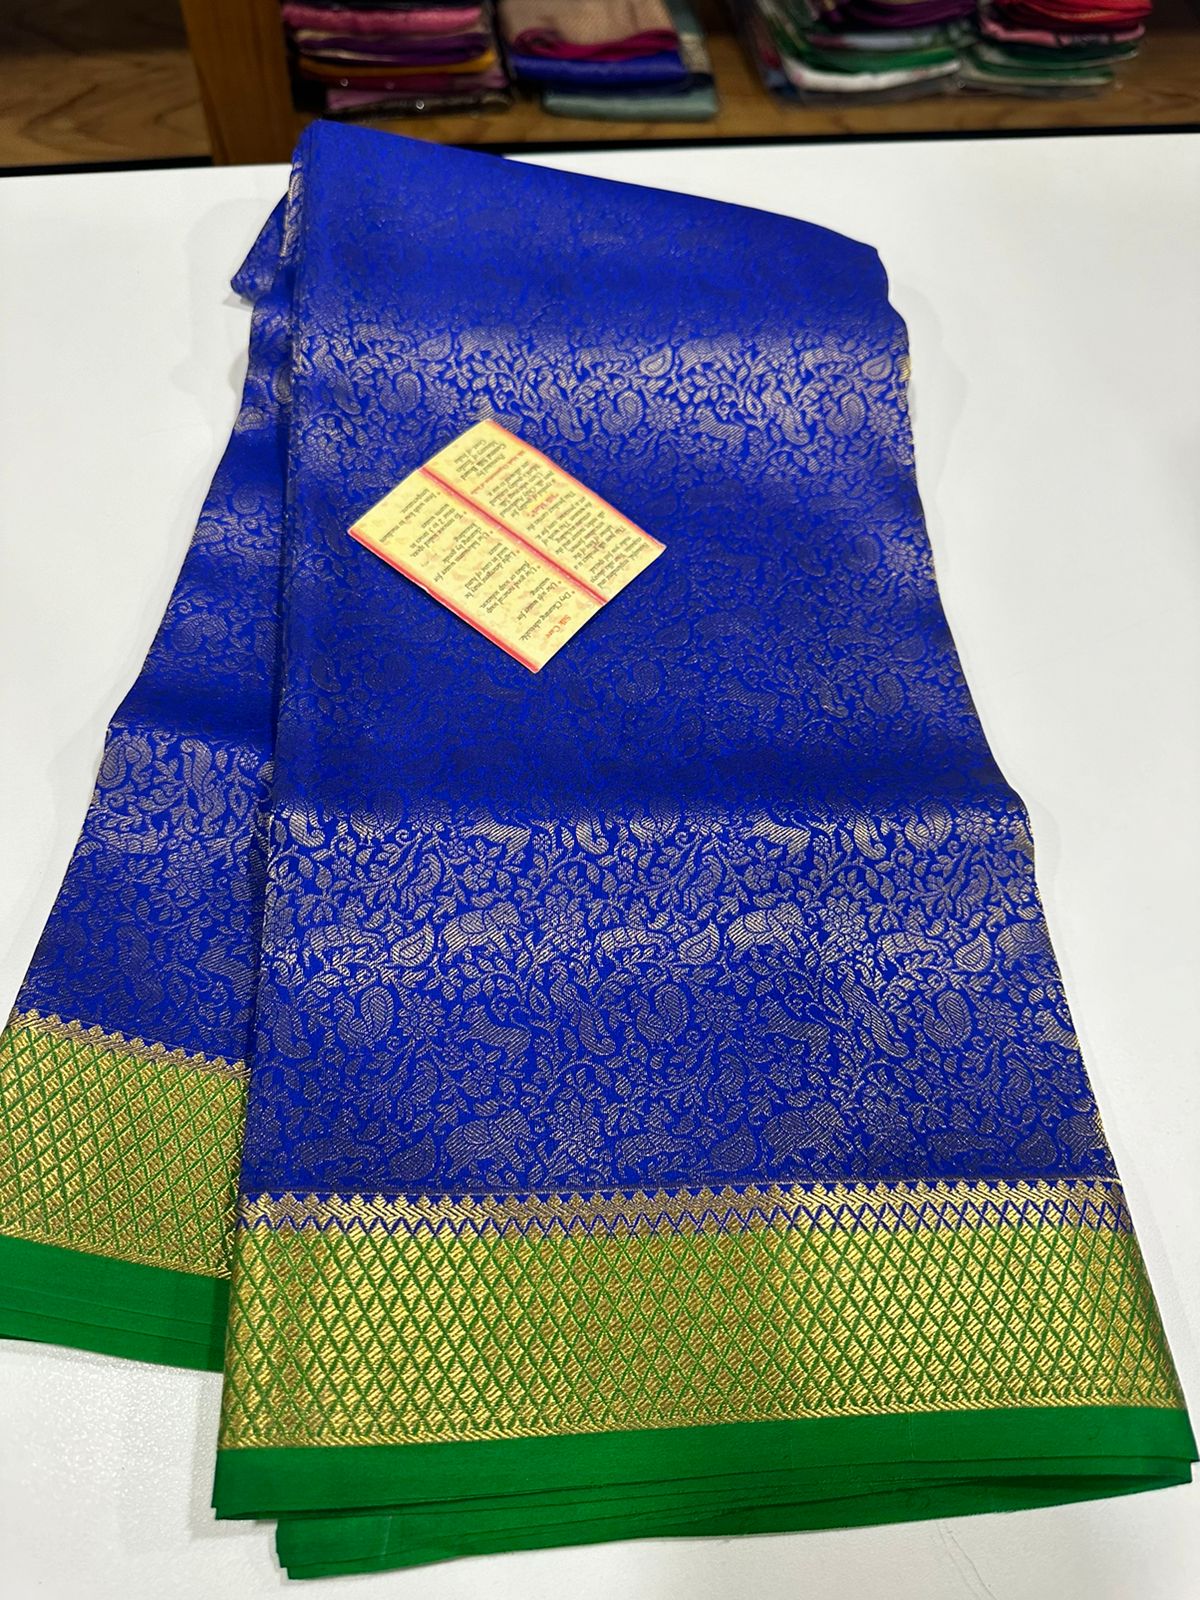 Pure brocade Mysore silk sarees with 120 grm thickness with rich pallu